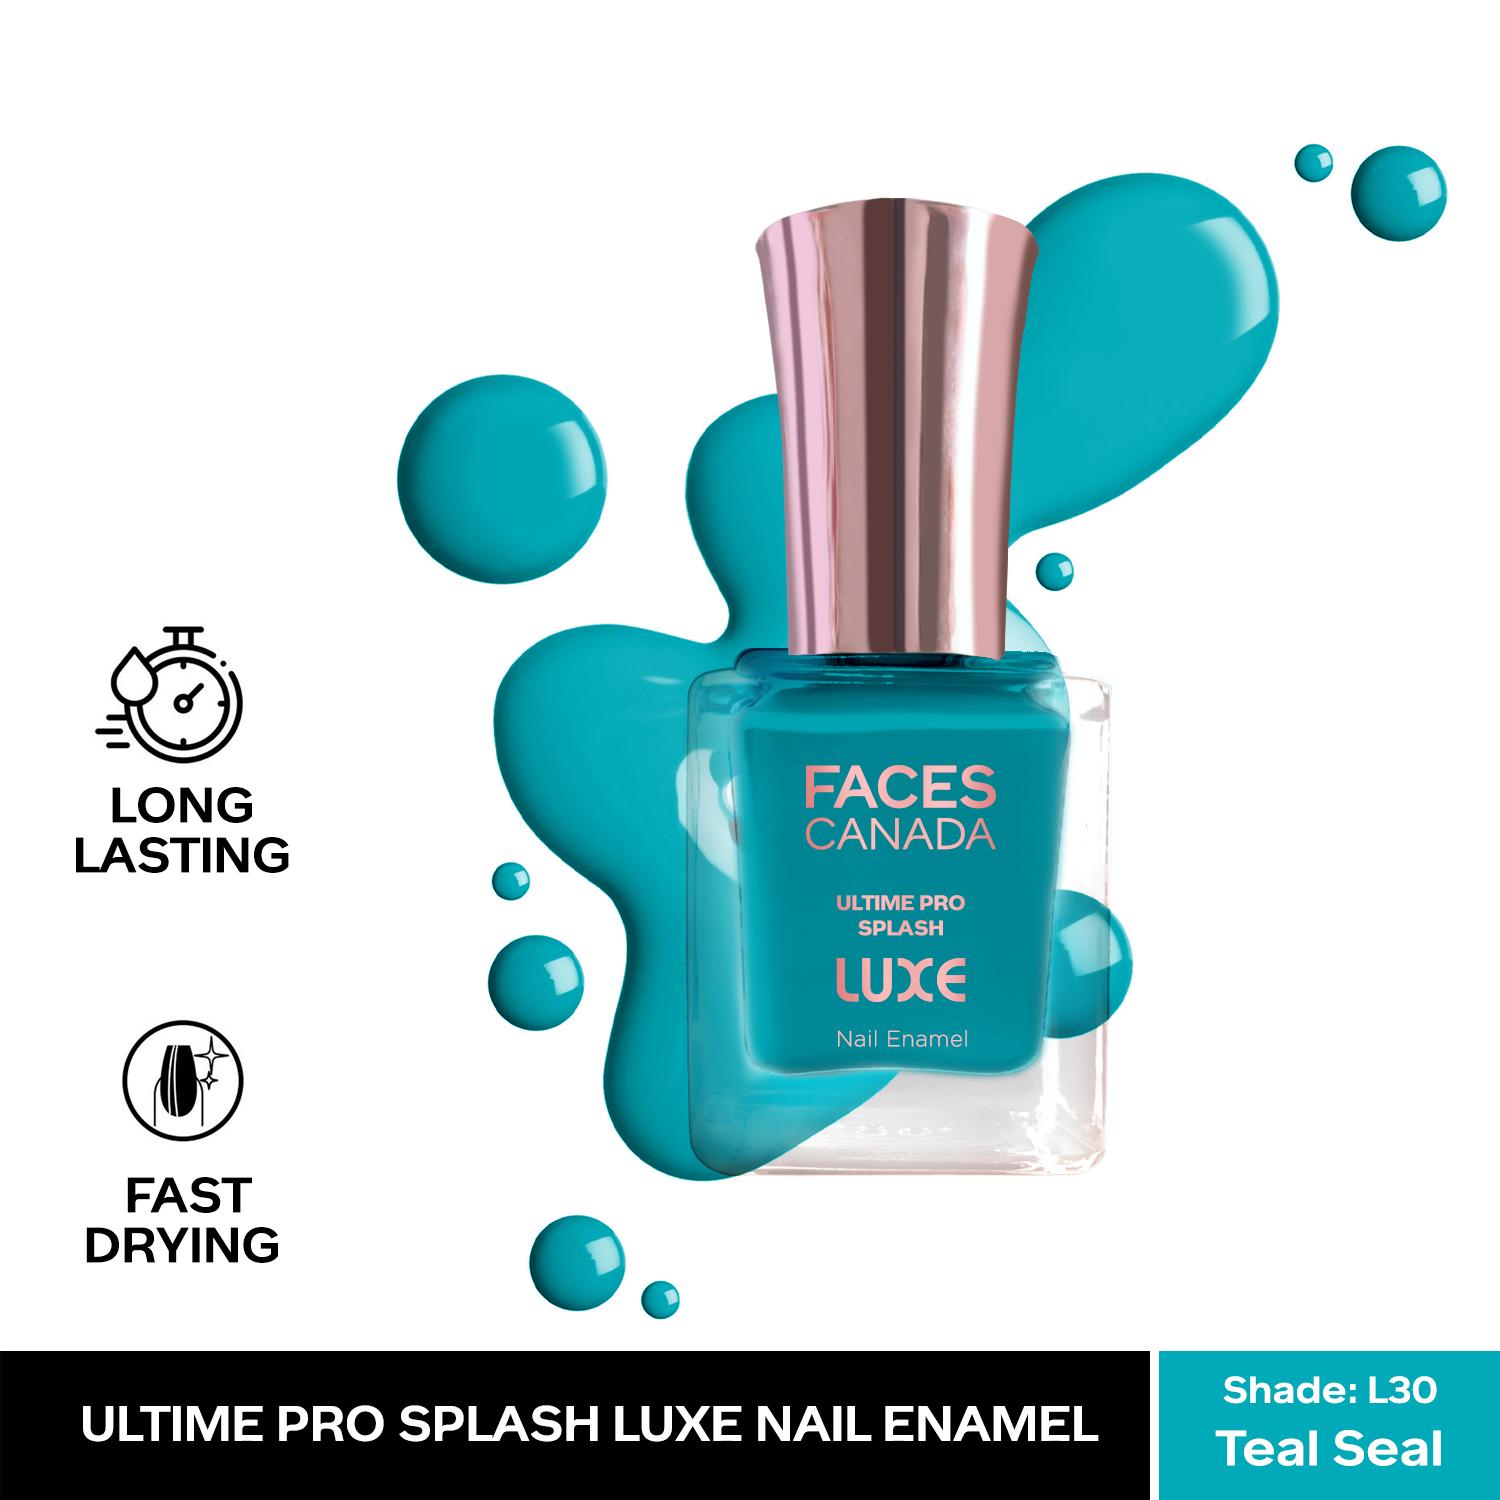 Faces Canada | Faces Canada Ultime Pro Splash Luxe Nail Enamel - Teal Seal (L30), Glossy Finish (12 ml)